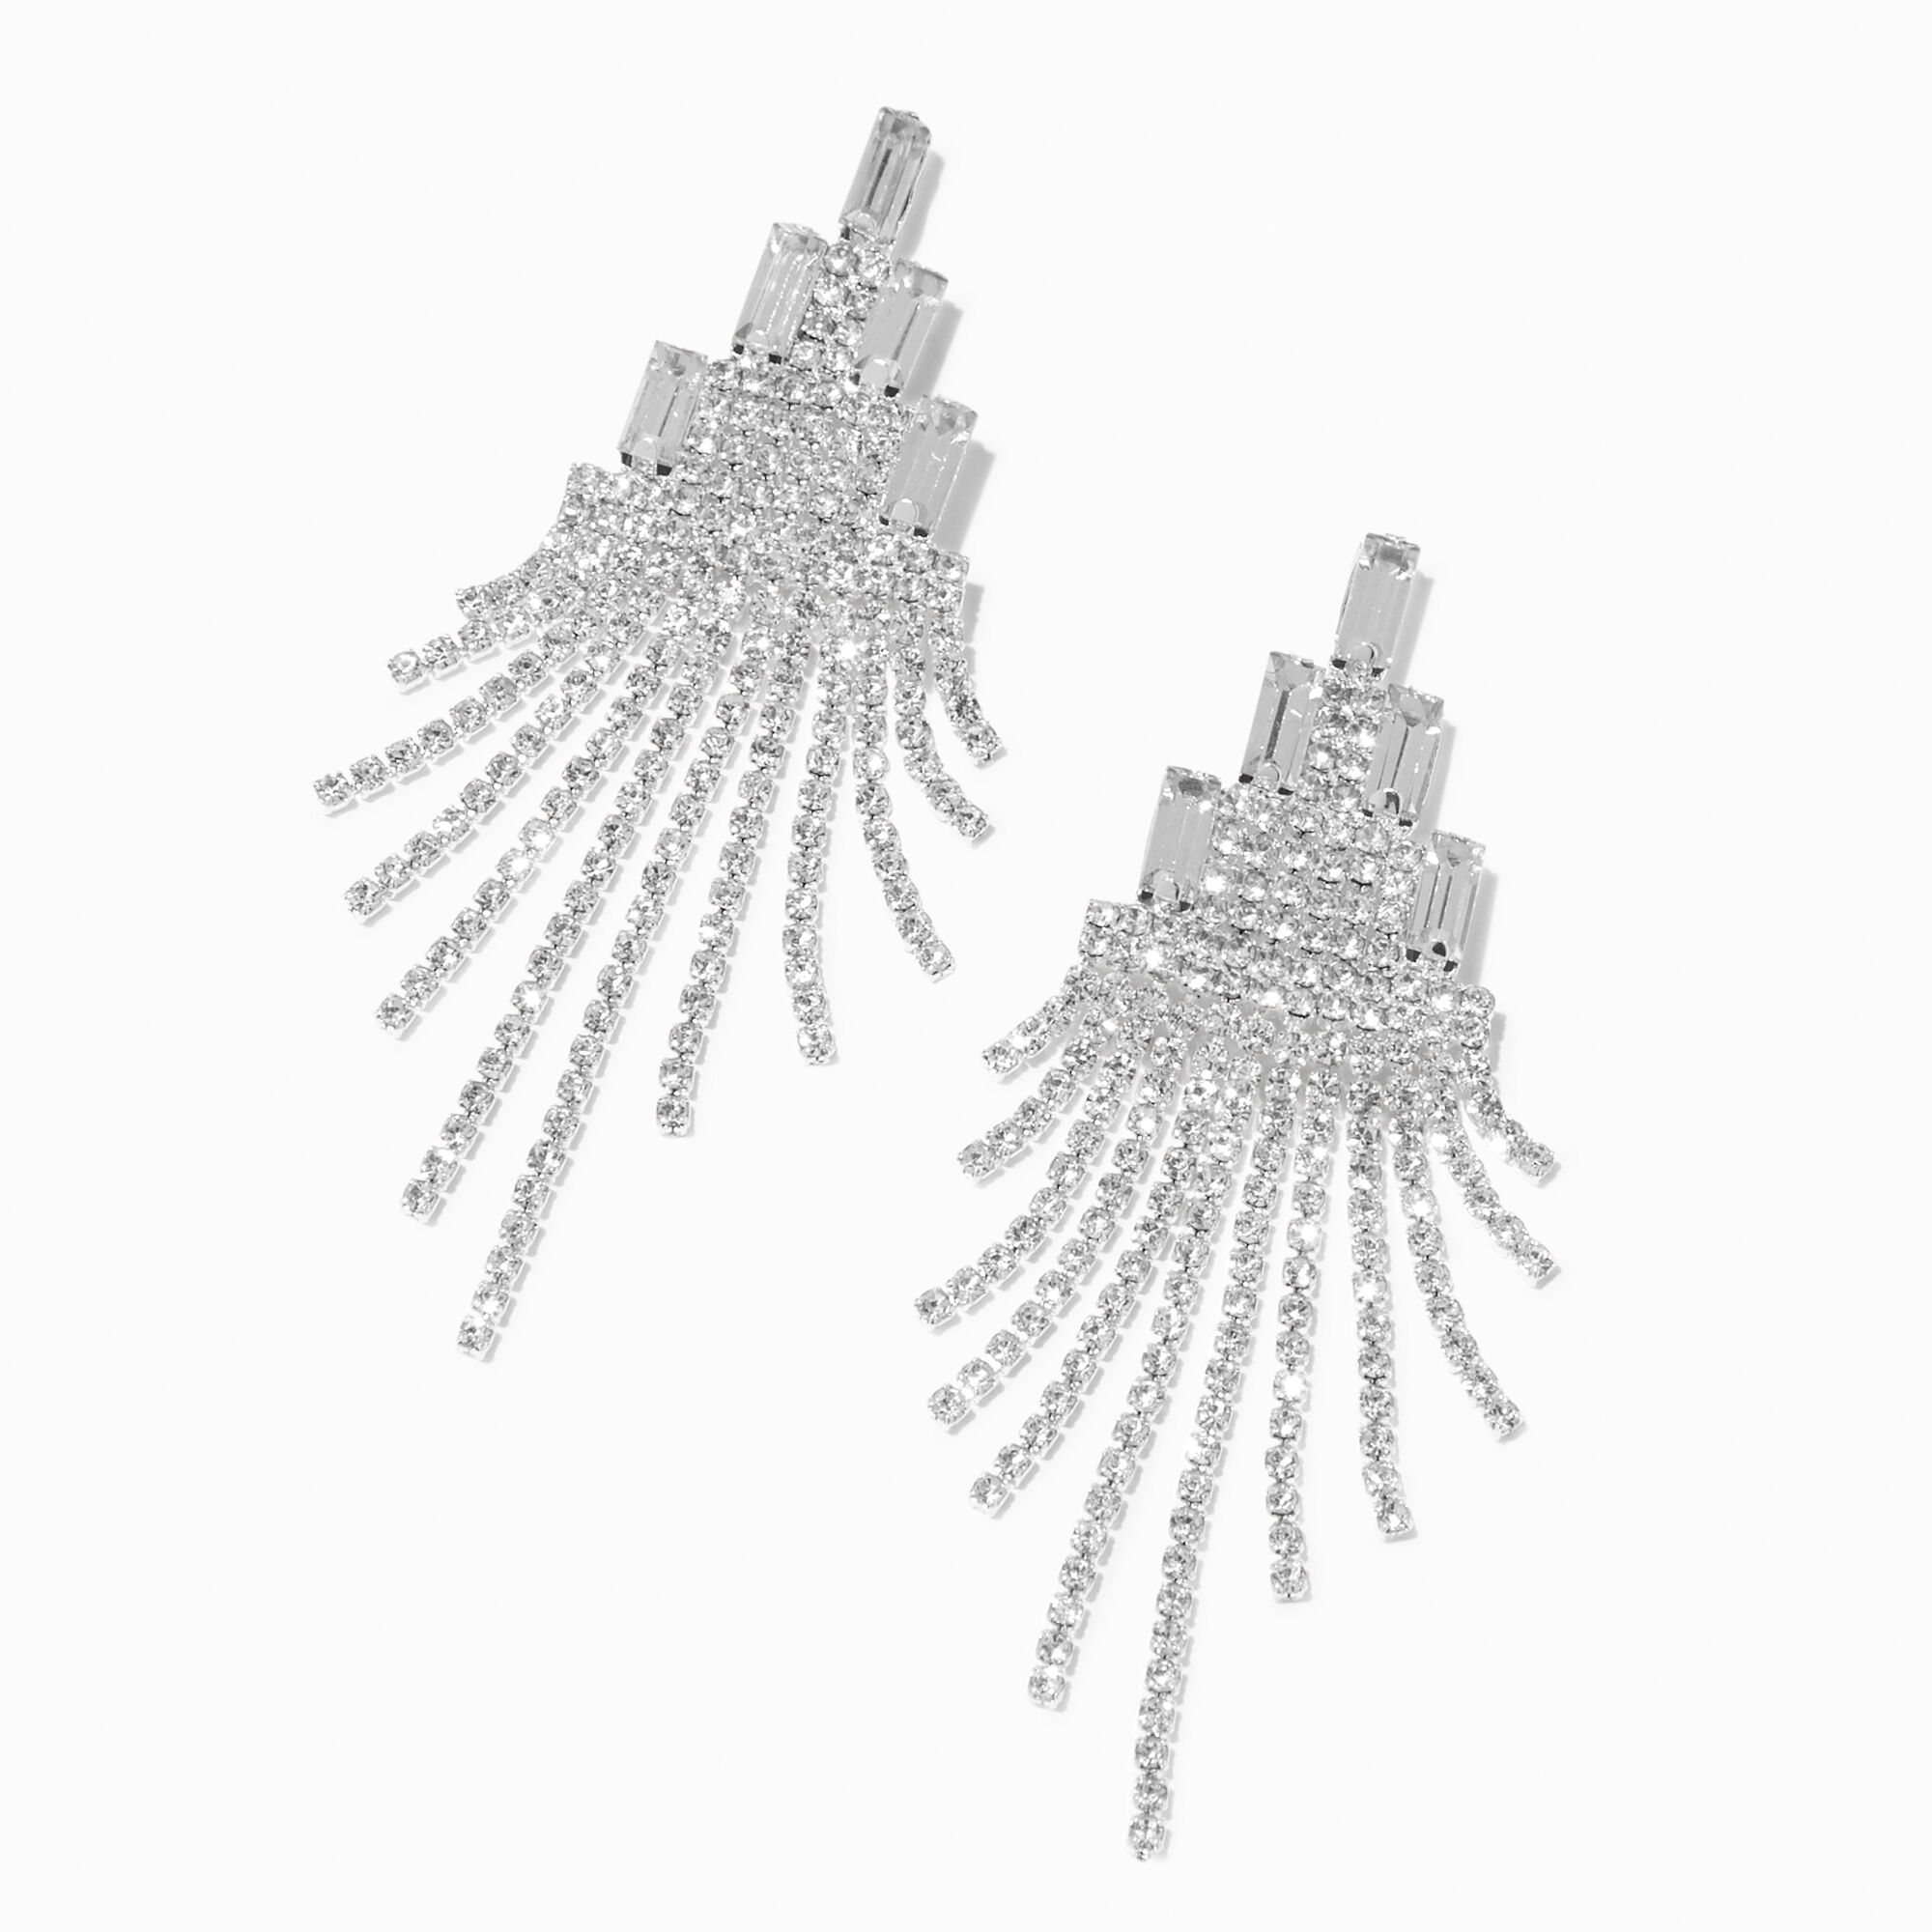 View Claires Crystal Tiered Chandelier 2 Drop Earrings Silver information